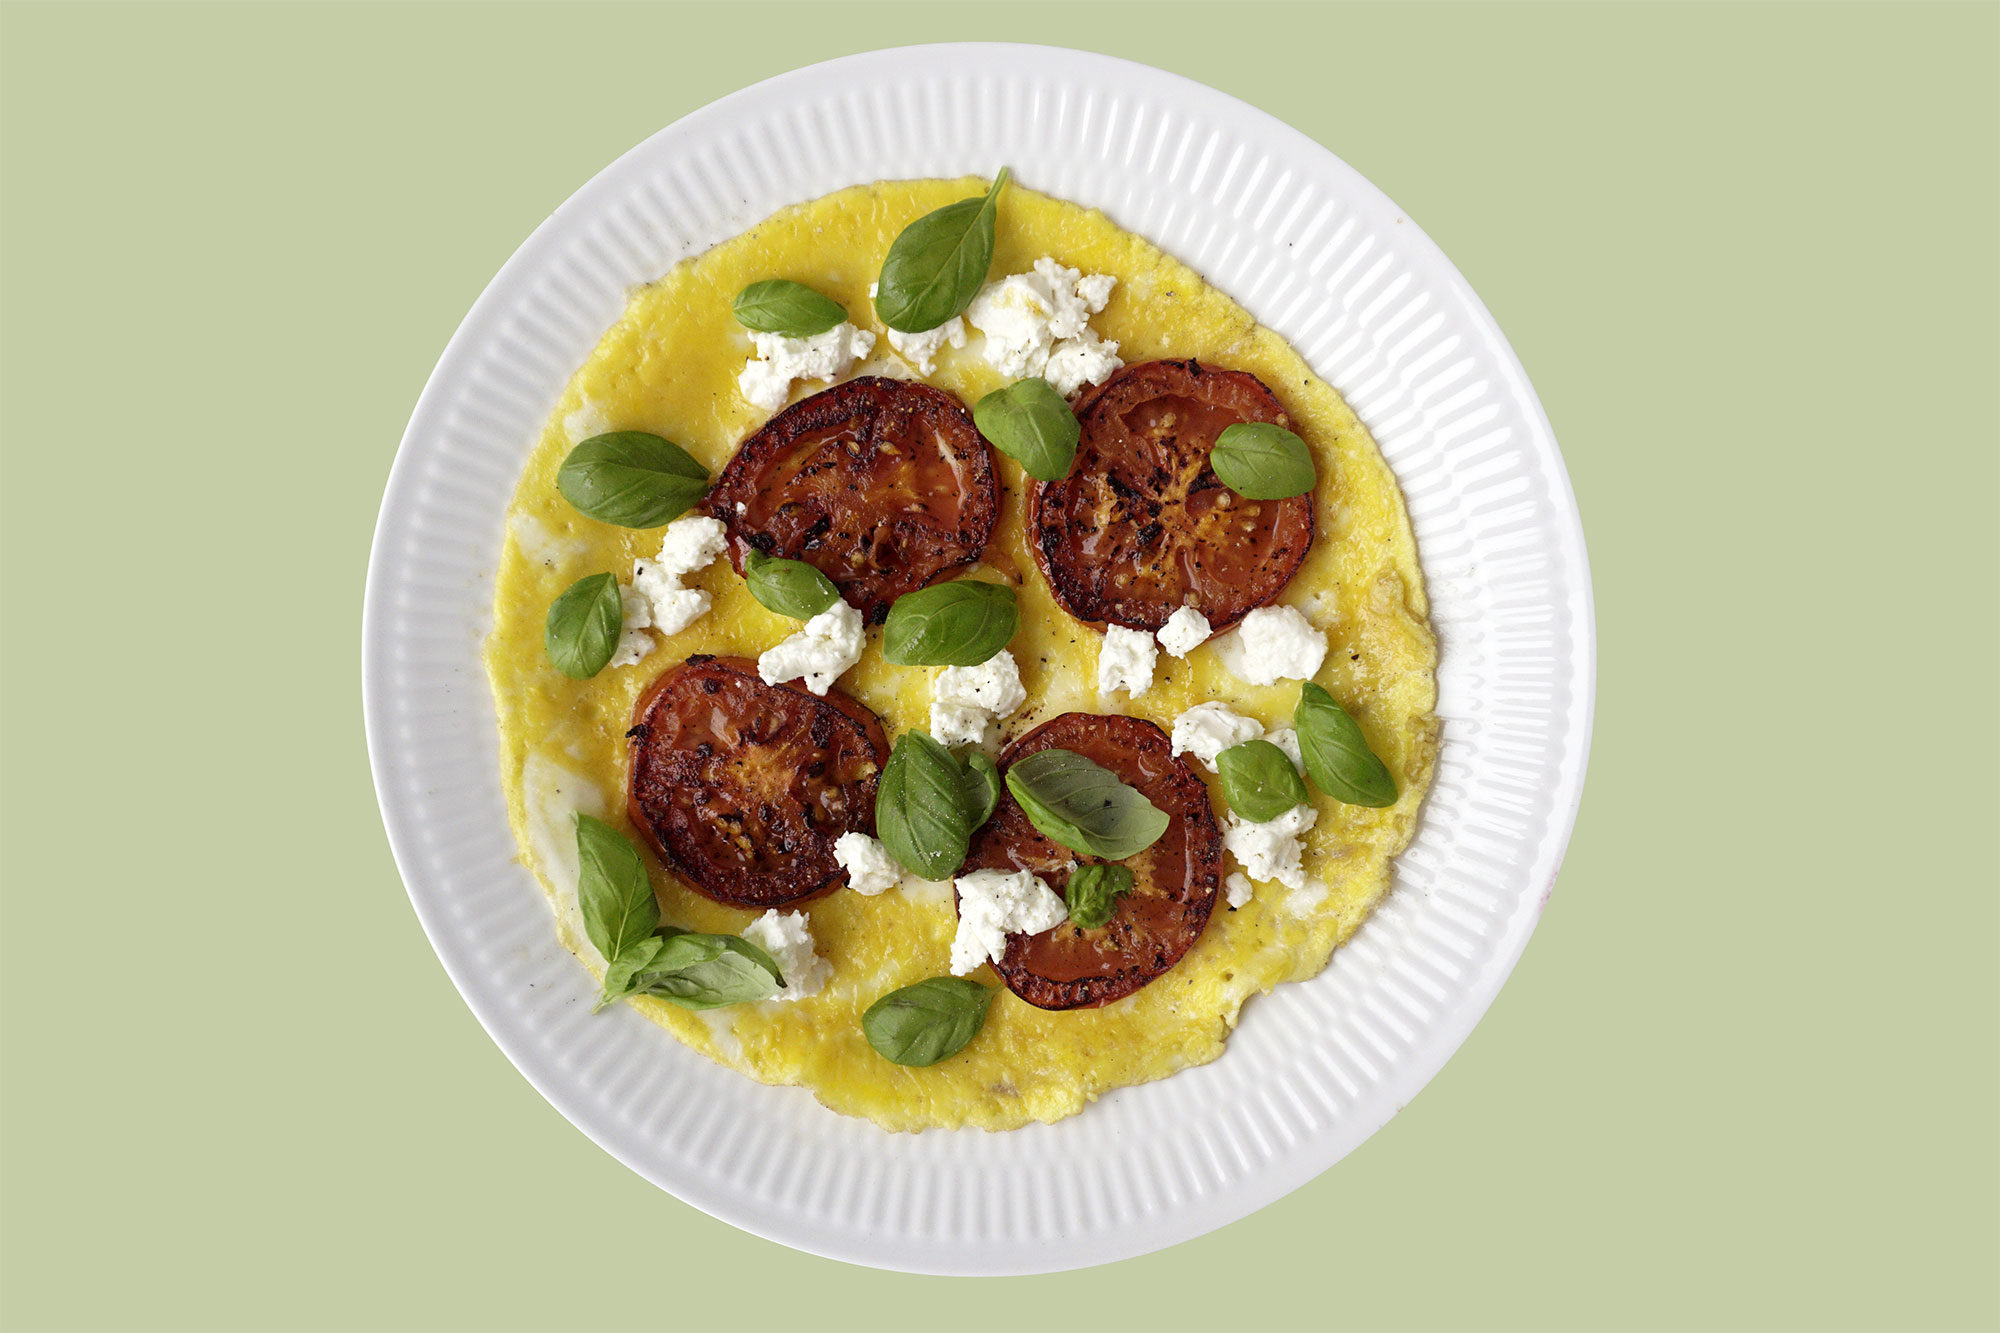 Dance Like Theres No Tomato: Omelet w. Grilled Tomato, Goat Cheese and Fresh Basil